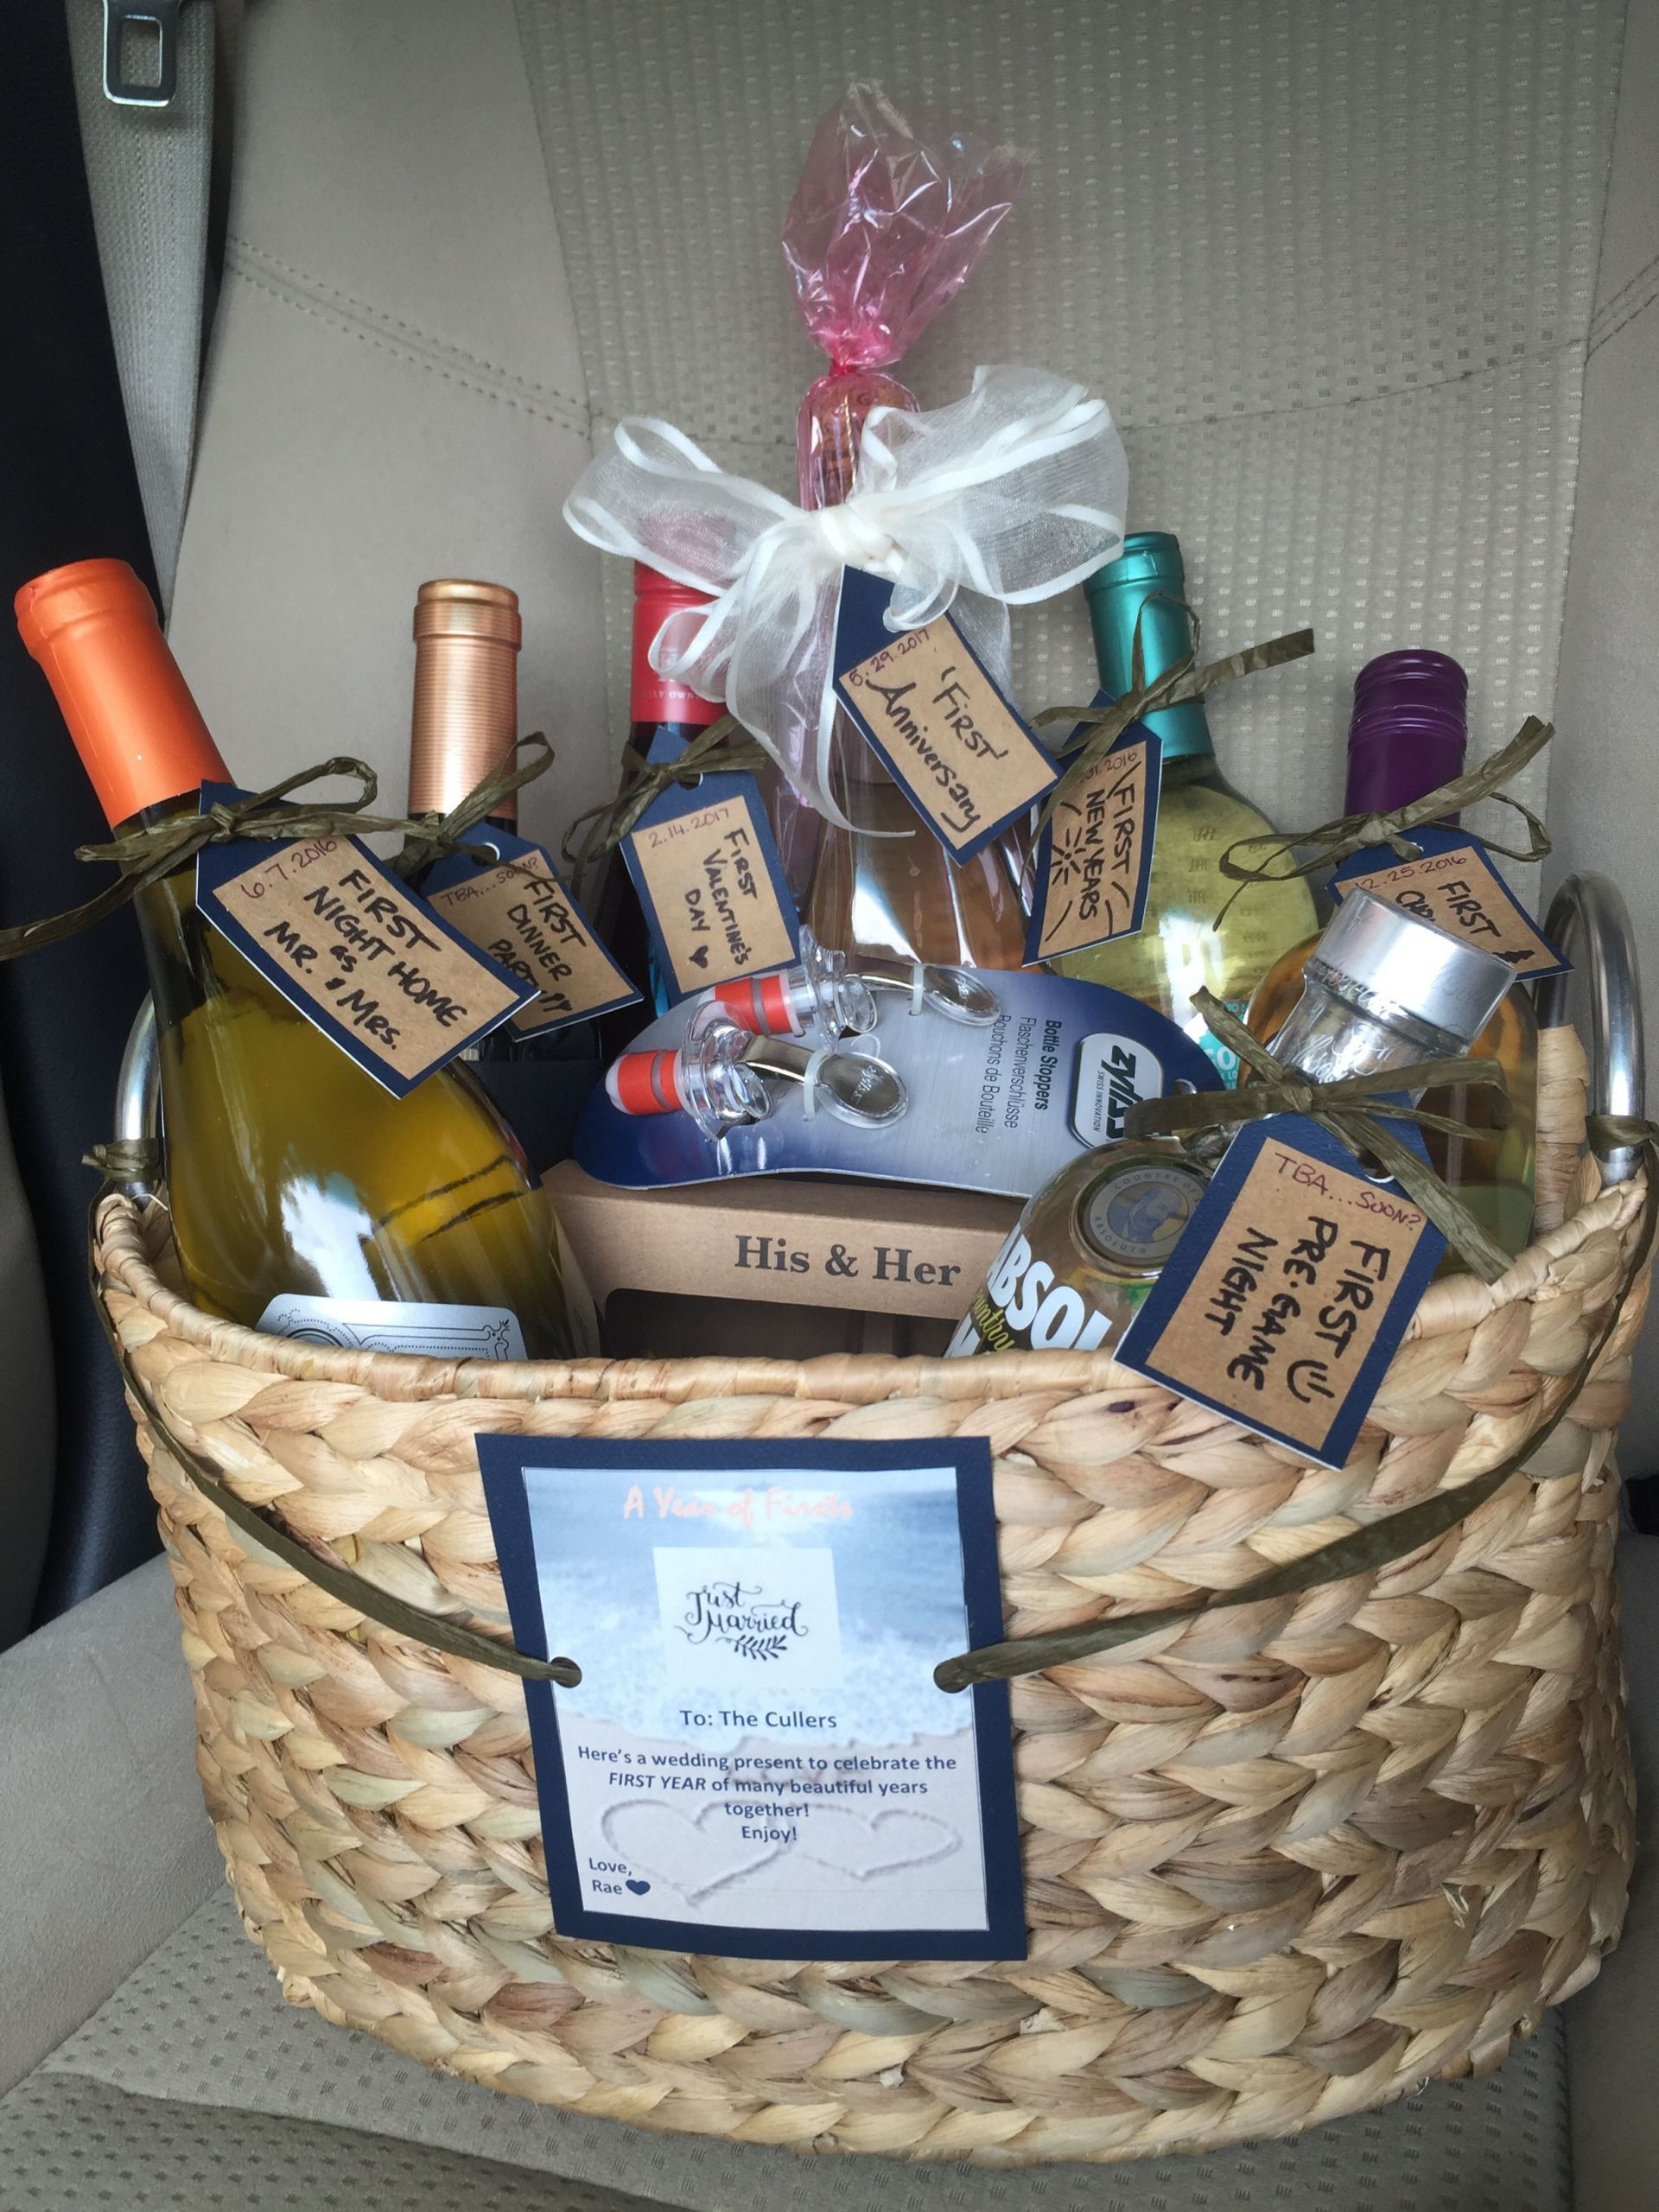 Engagement Party Gift Basket Ideas
 A year of firsts The BEST and easiest wedding present for